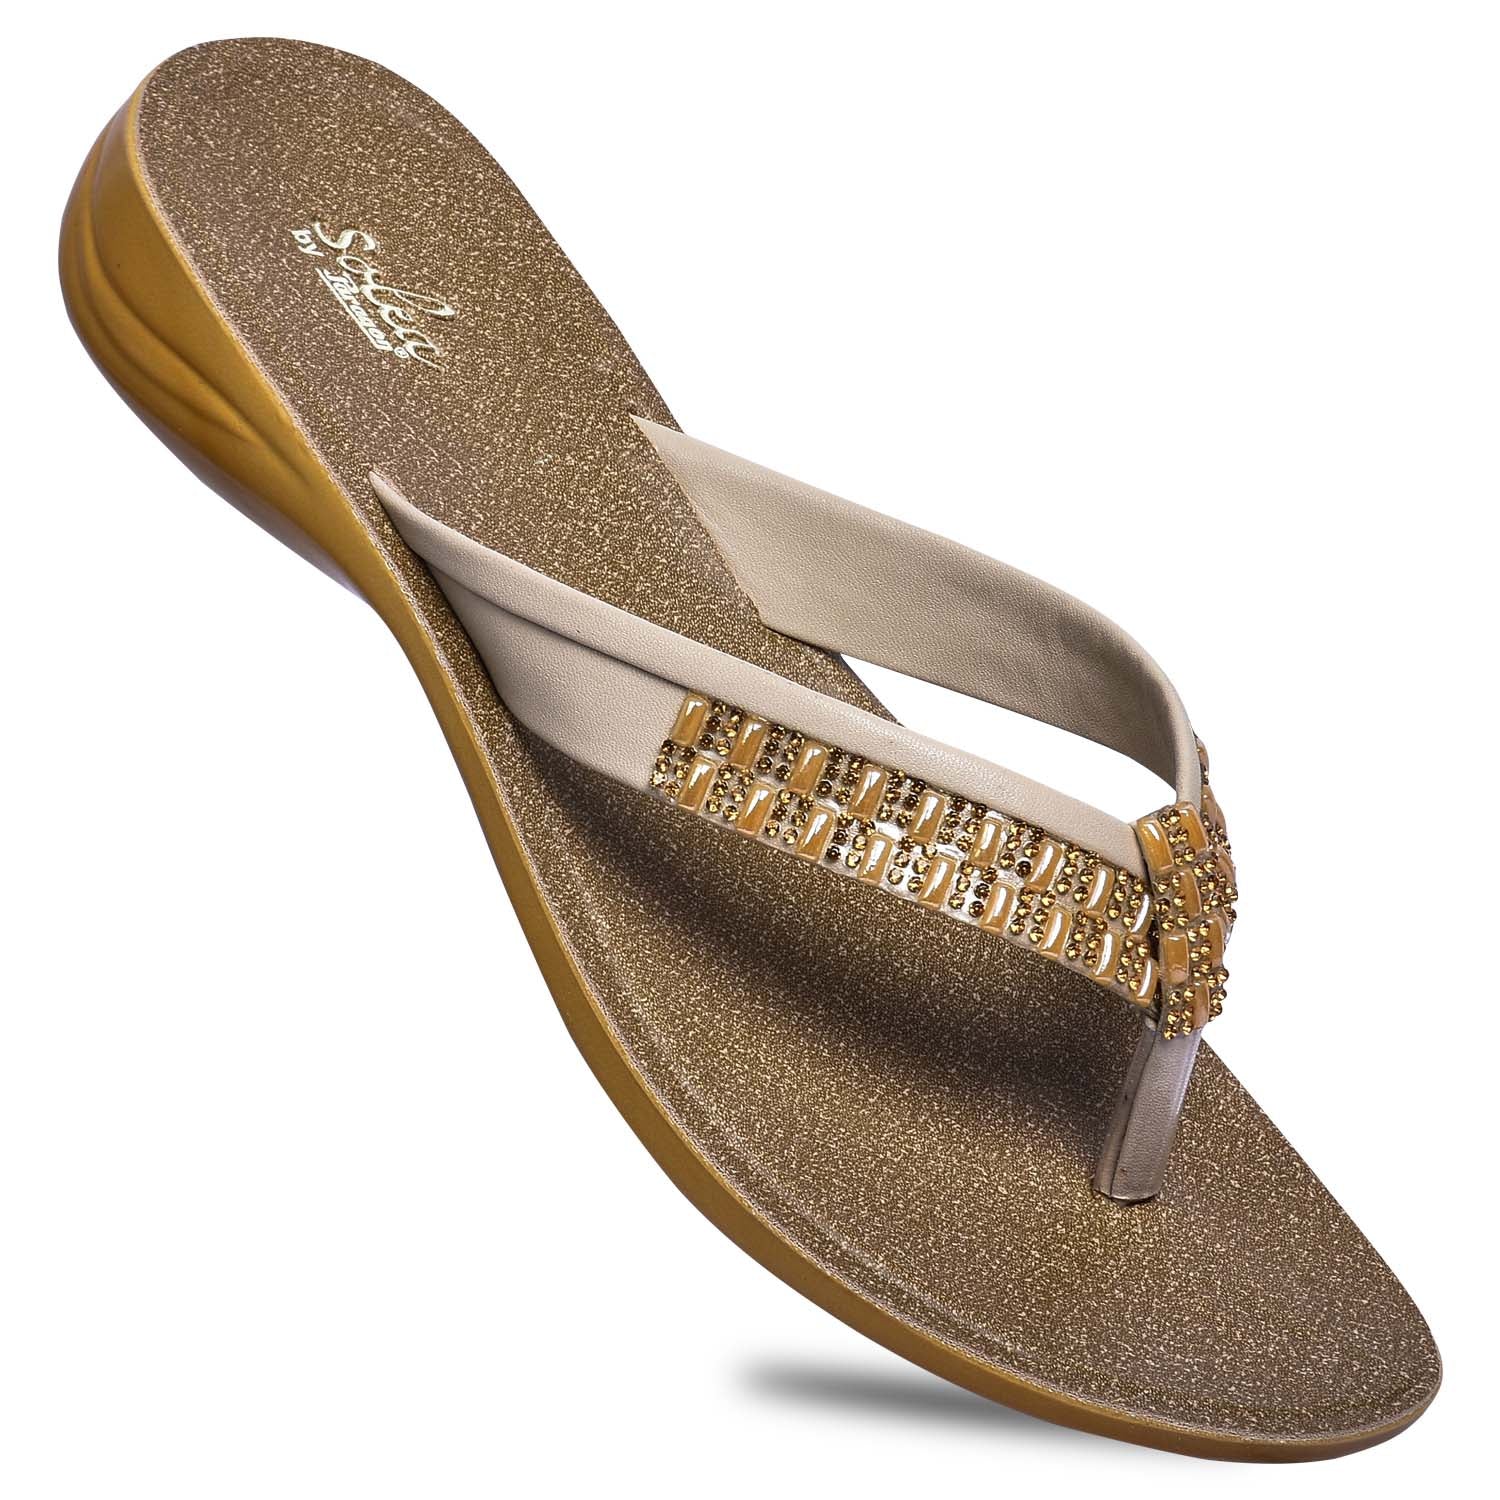 Paragon R90251L Women Sandals | Casual &amp; Formal Sandals | Stylish, Comfortable &amp; Durable | For Daily &amp; Occasion Wear